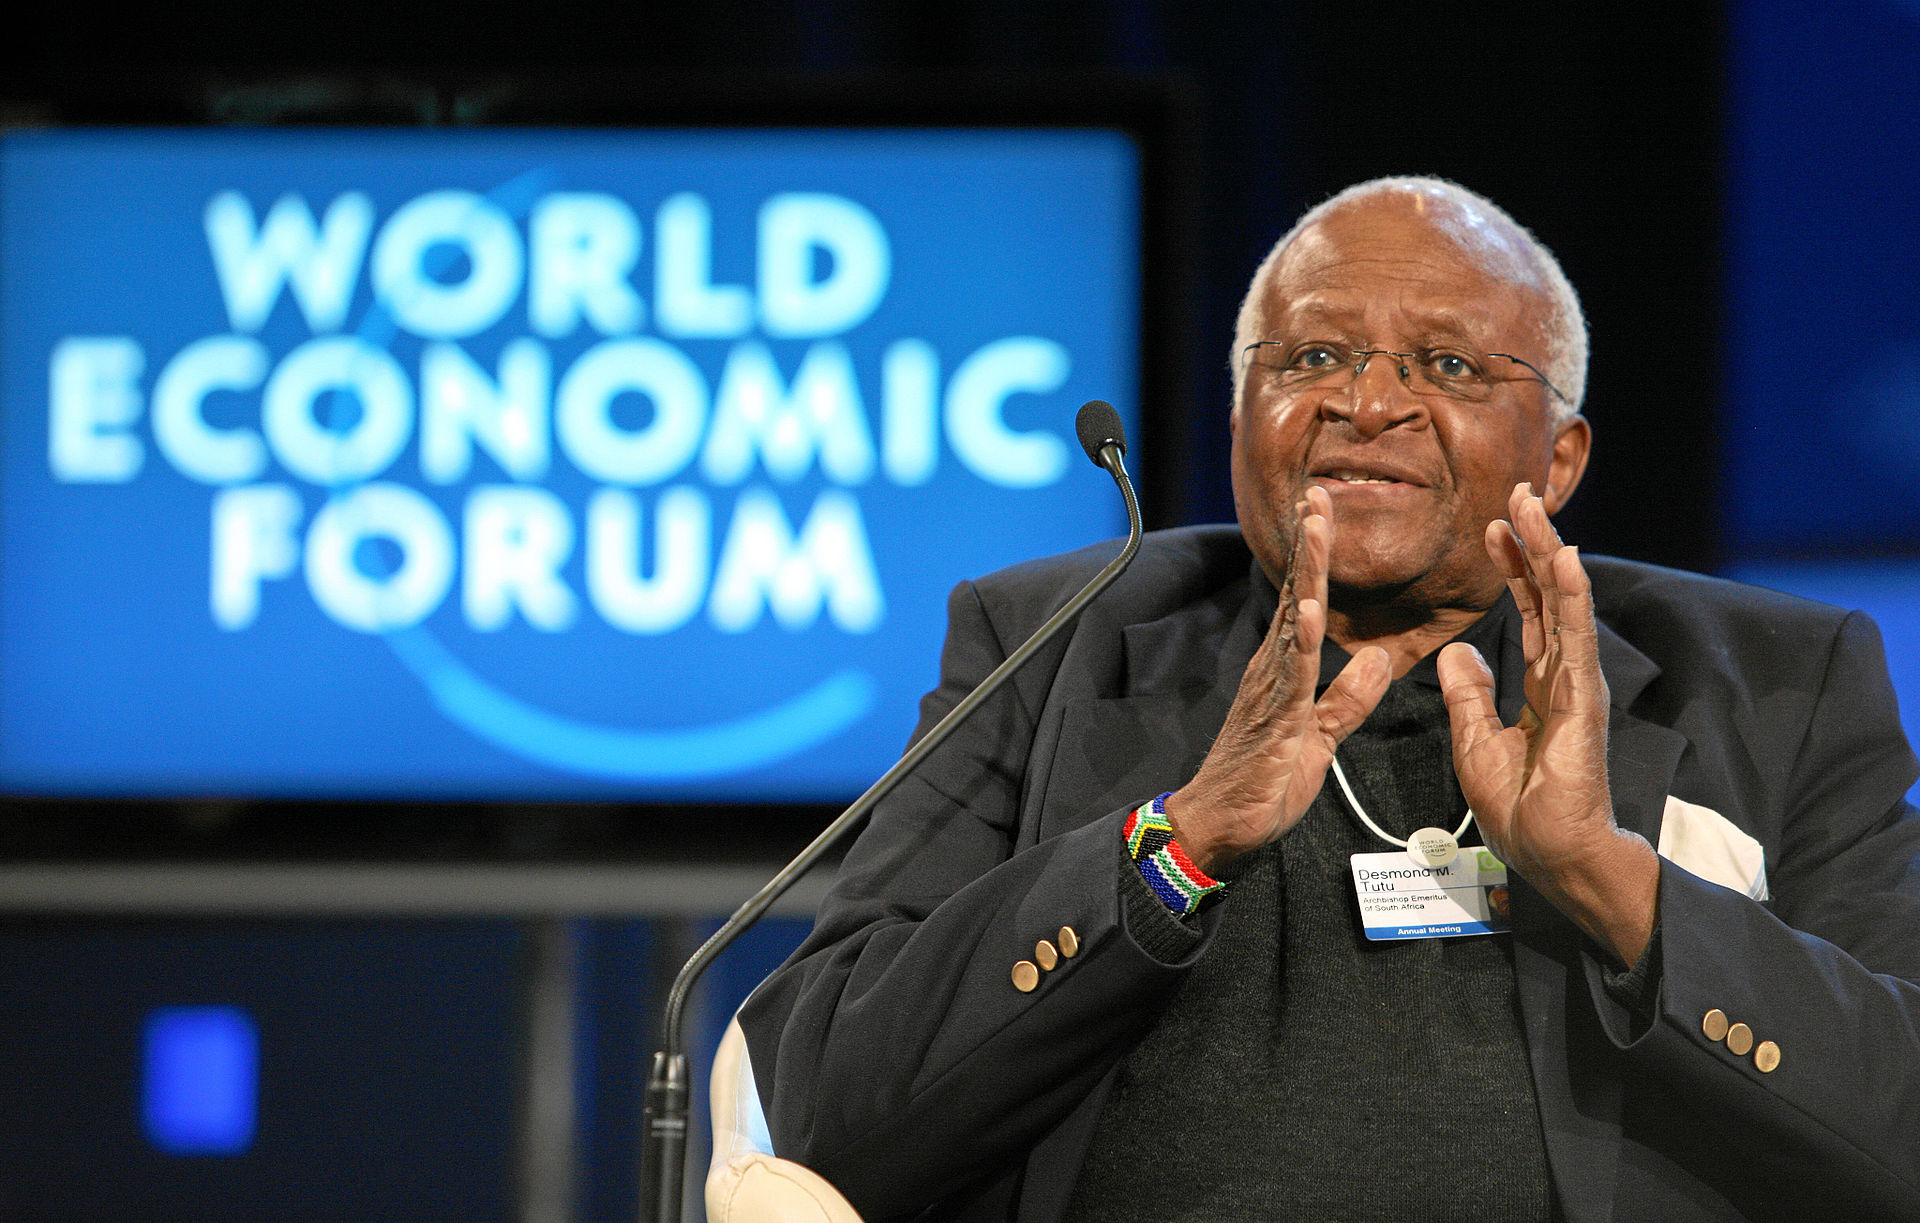 The Real Legacy of Desmond Tutu